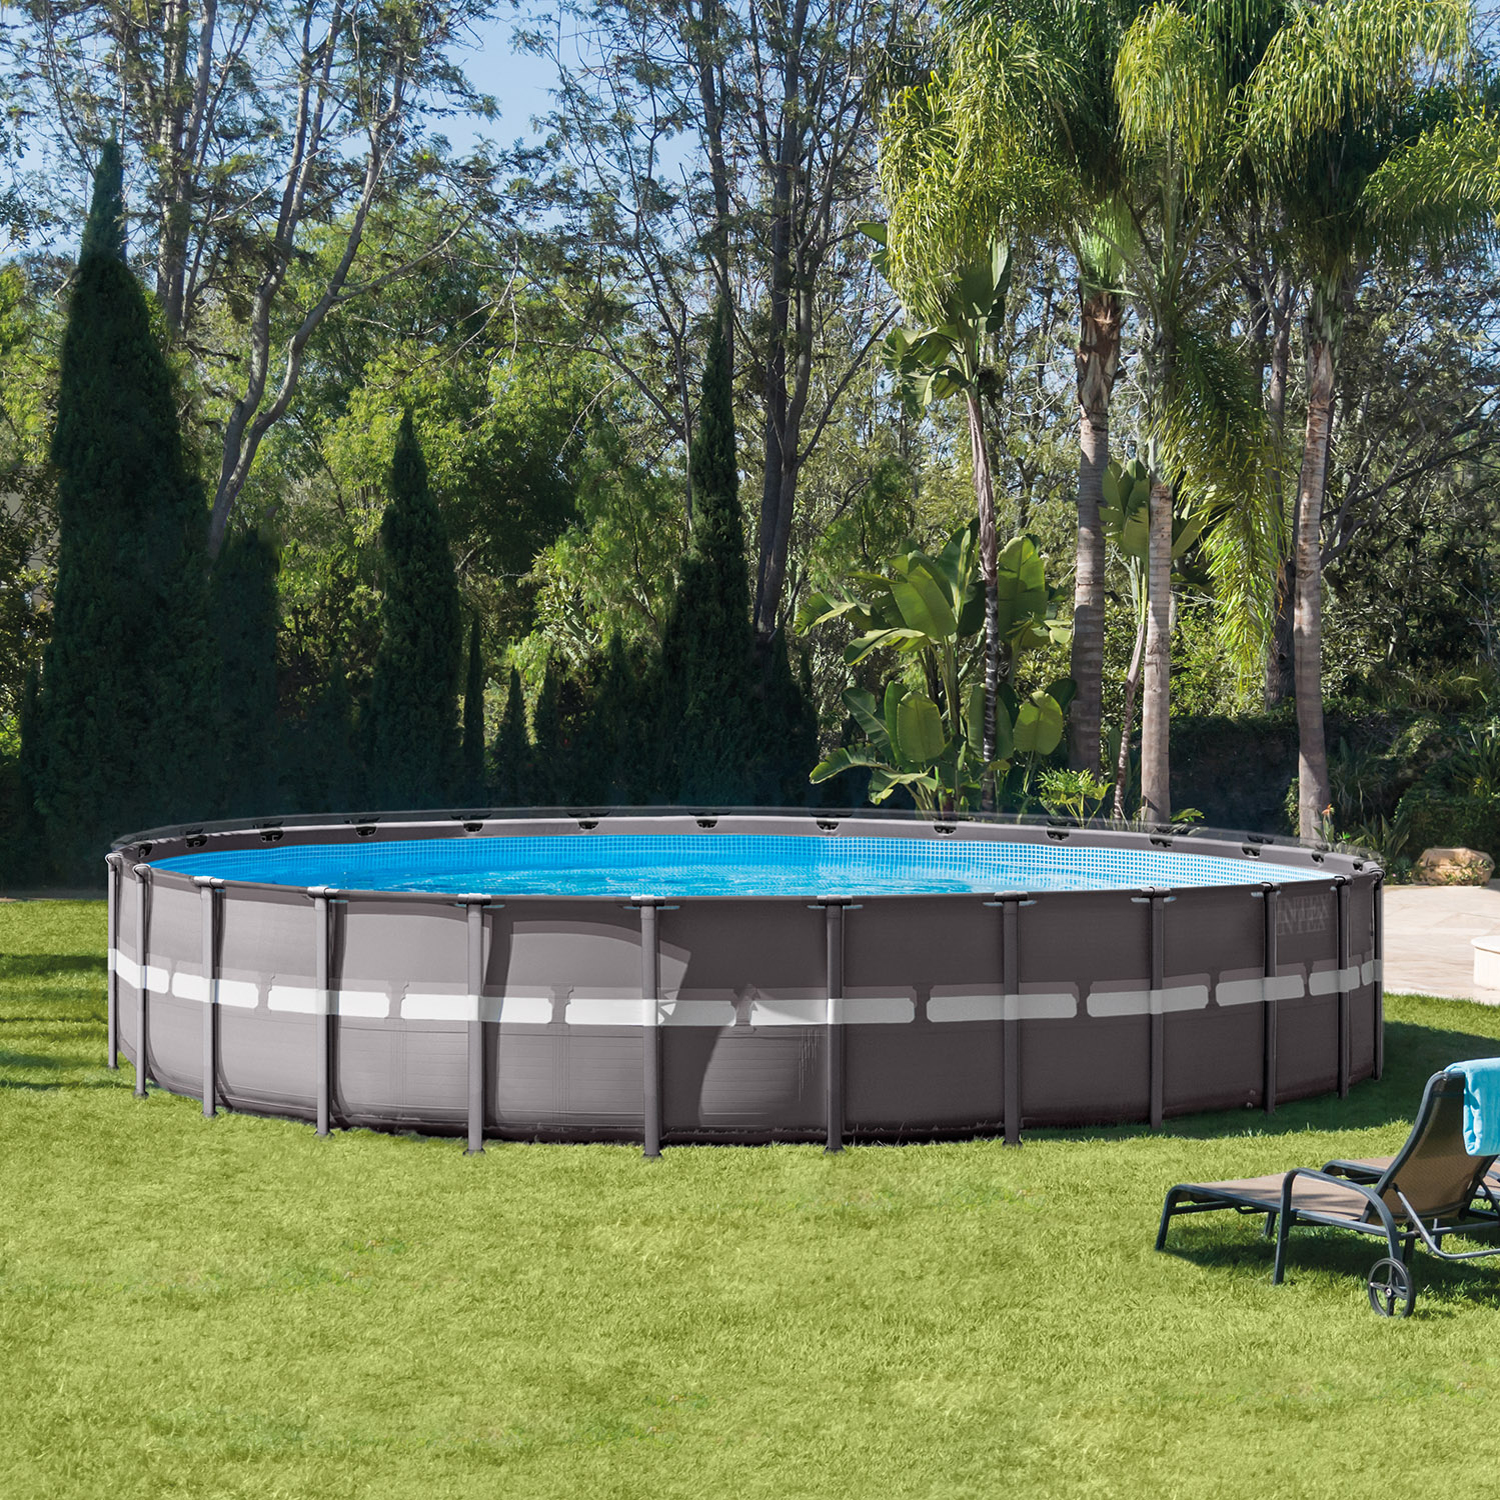 How To Level Ground For Intex Pool